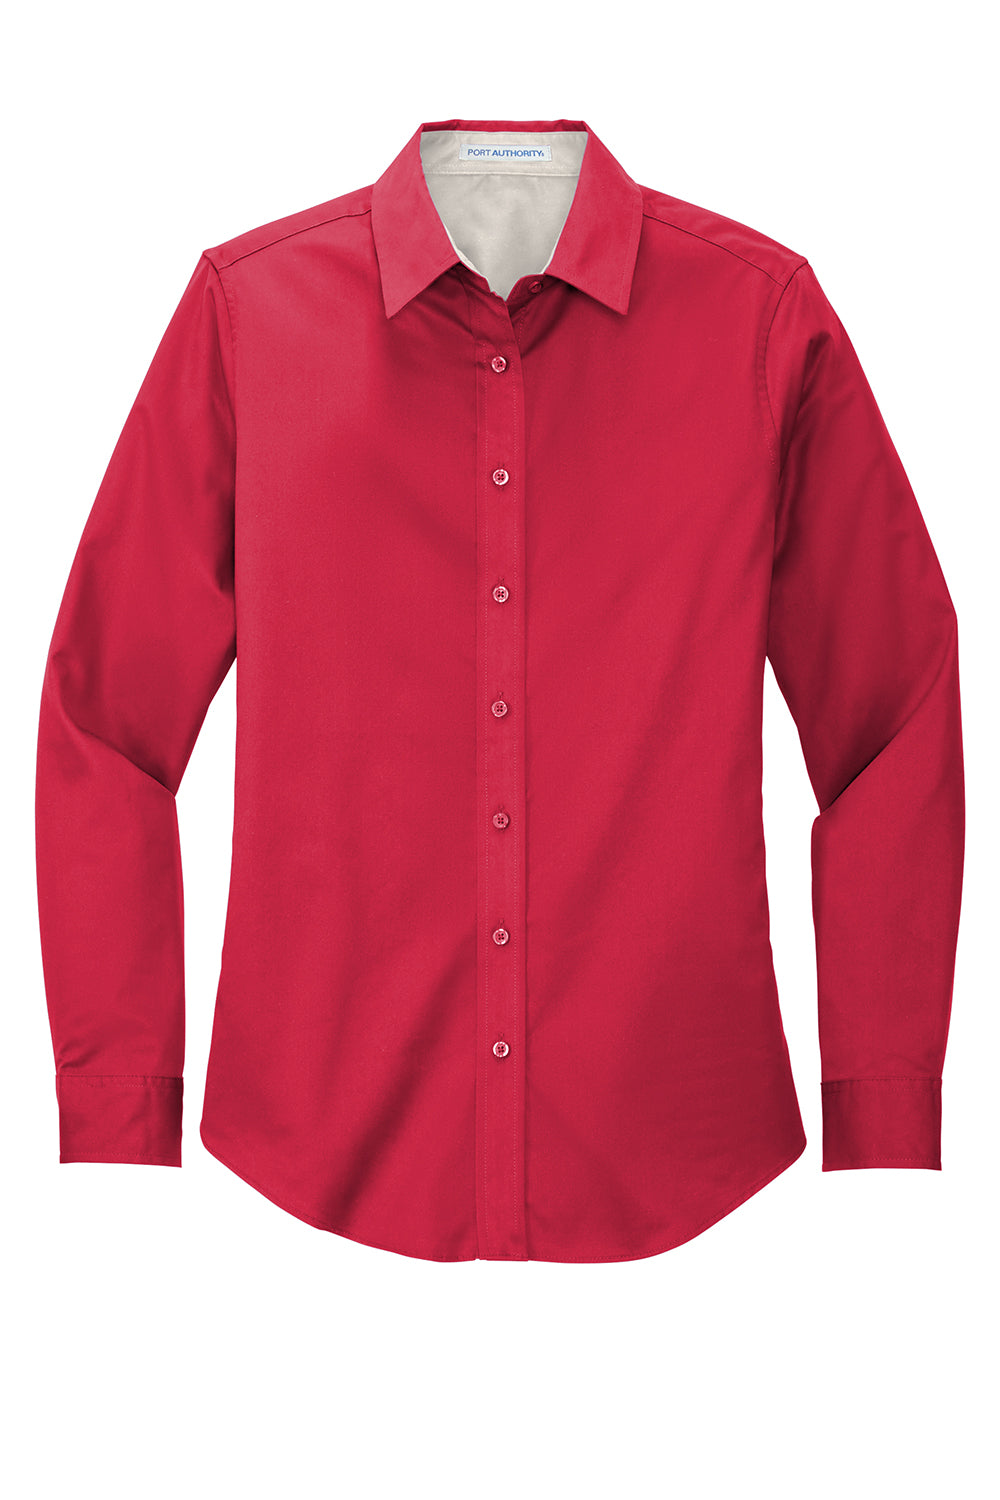 Port Authority L608 Womens Easy Care Wrinkle Resistant Long Sleeve Button Down Shirt Red Flat Front